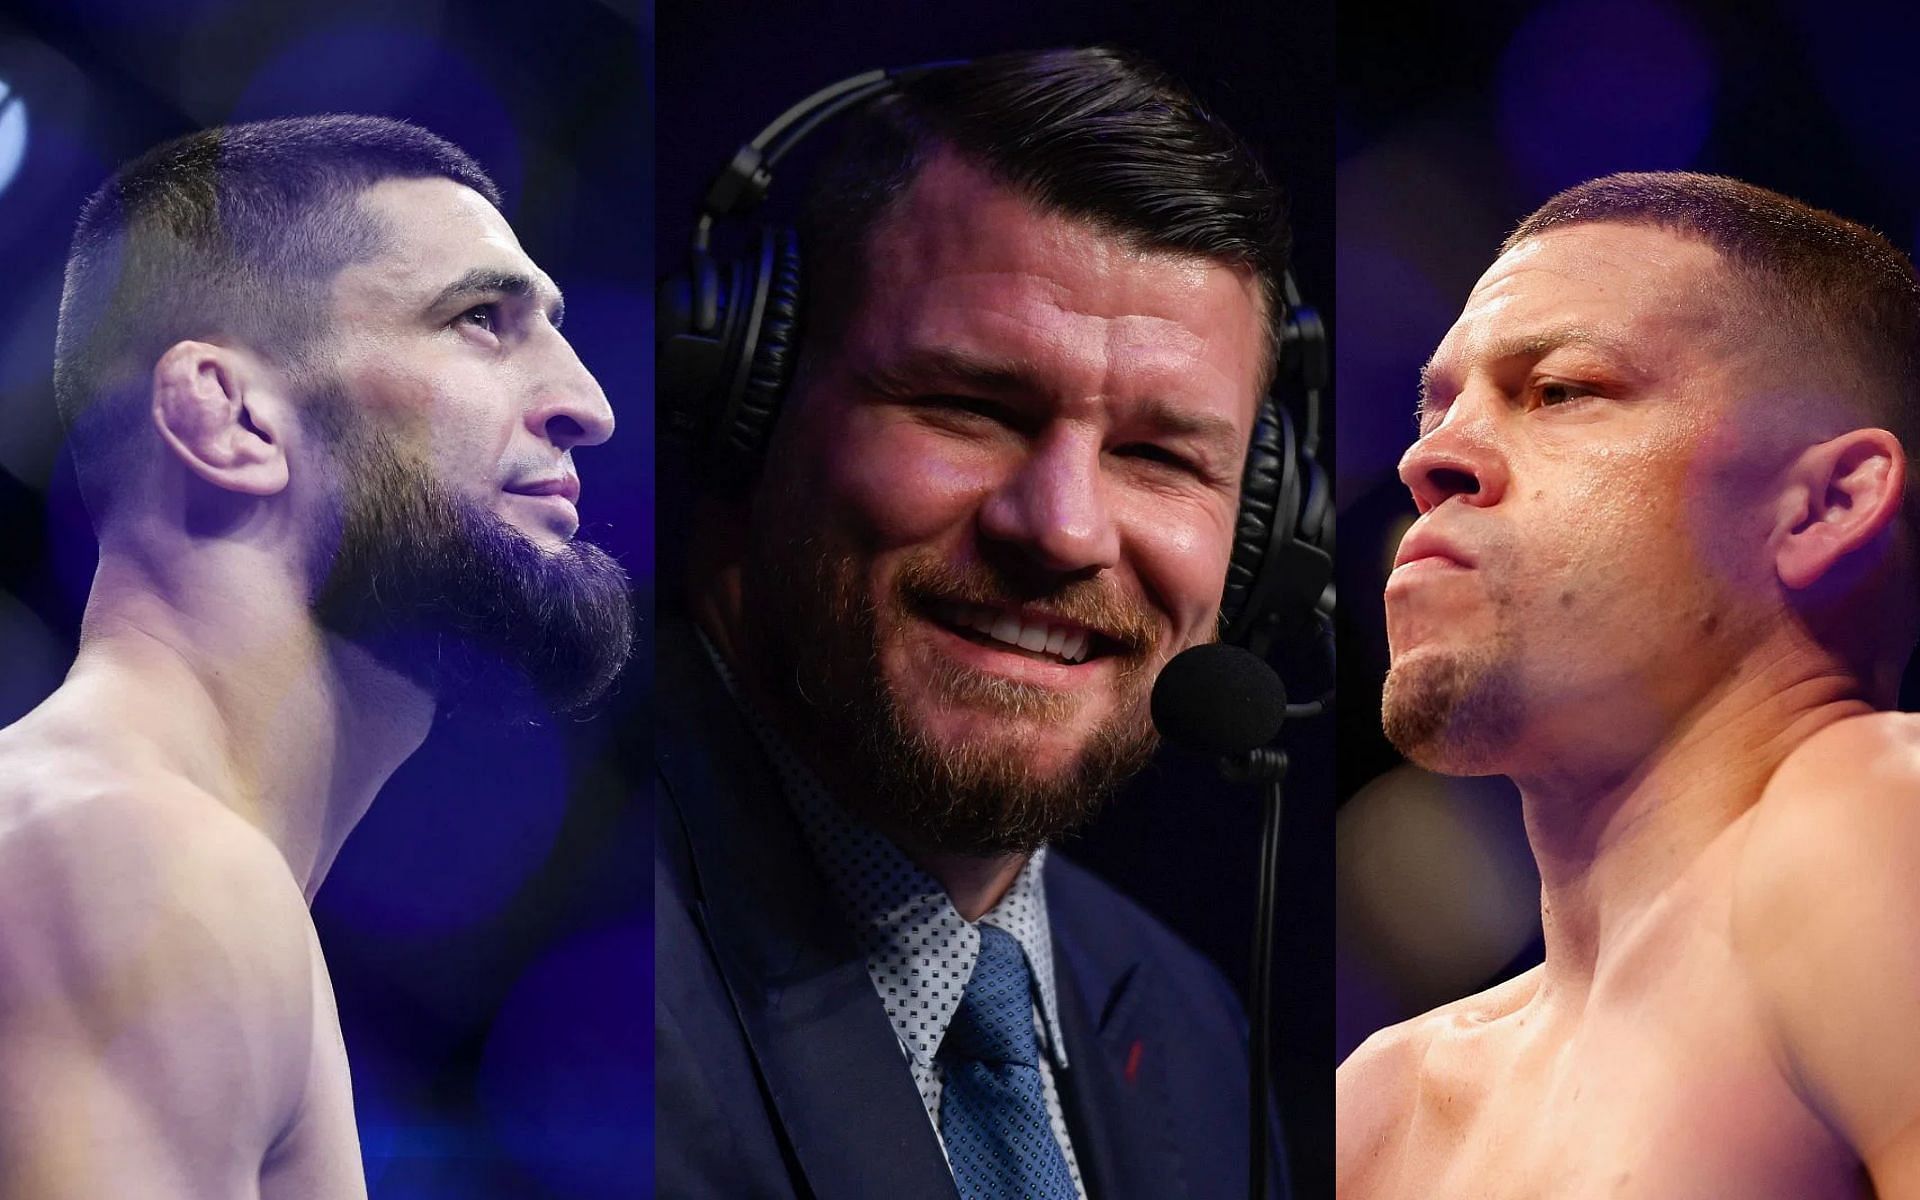 Khamzat Chimaev (left), Michael Bisping (middle) and Nate Diaz (right)